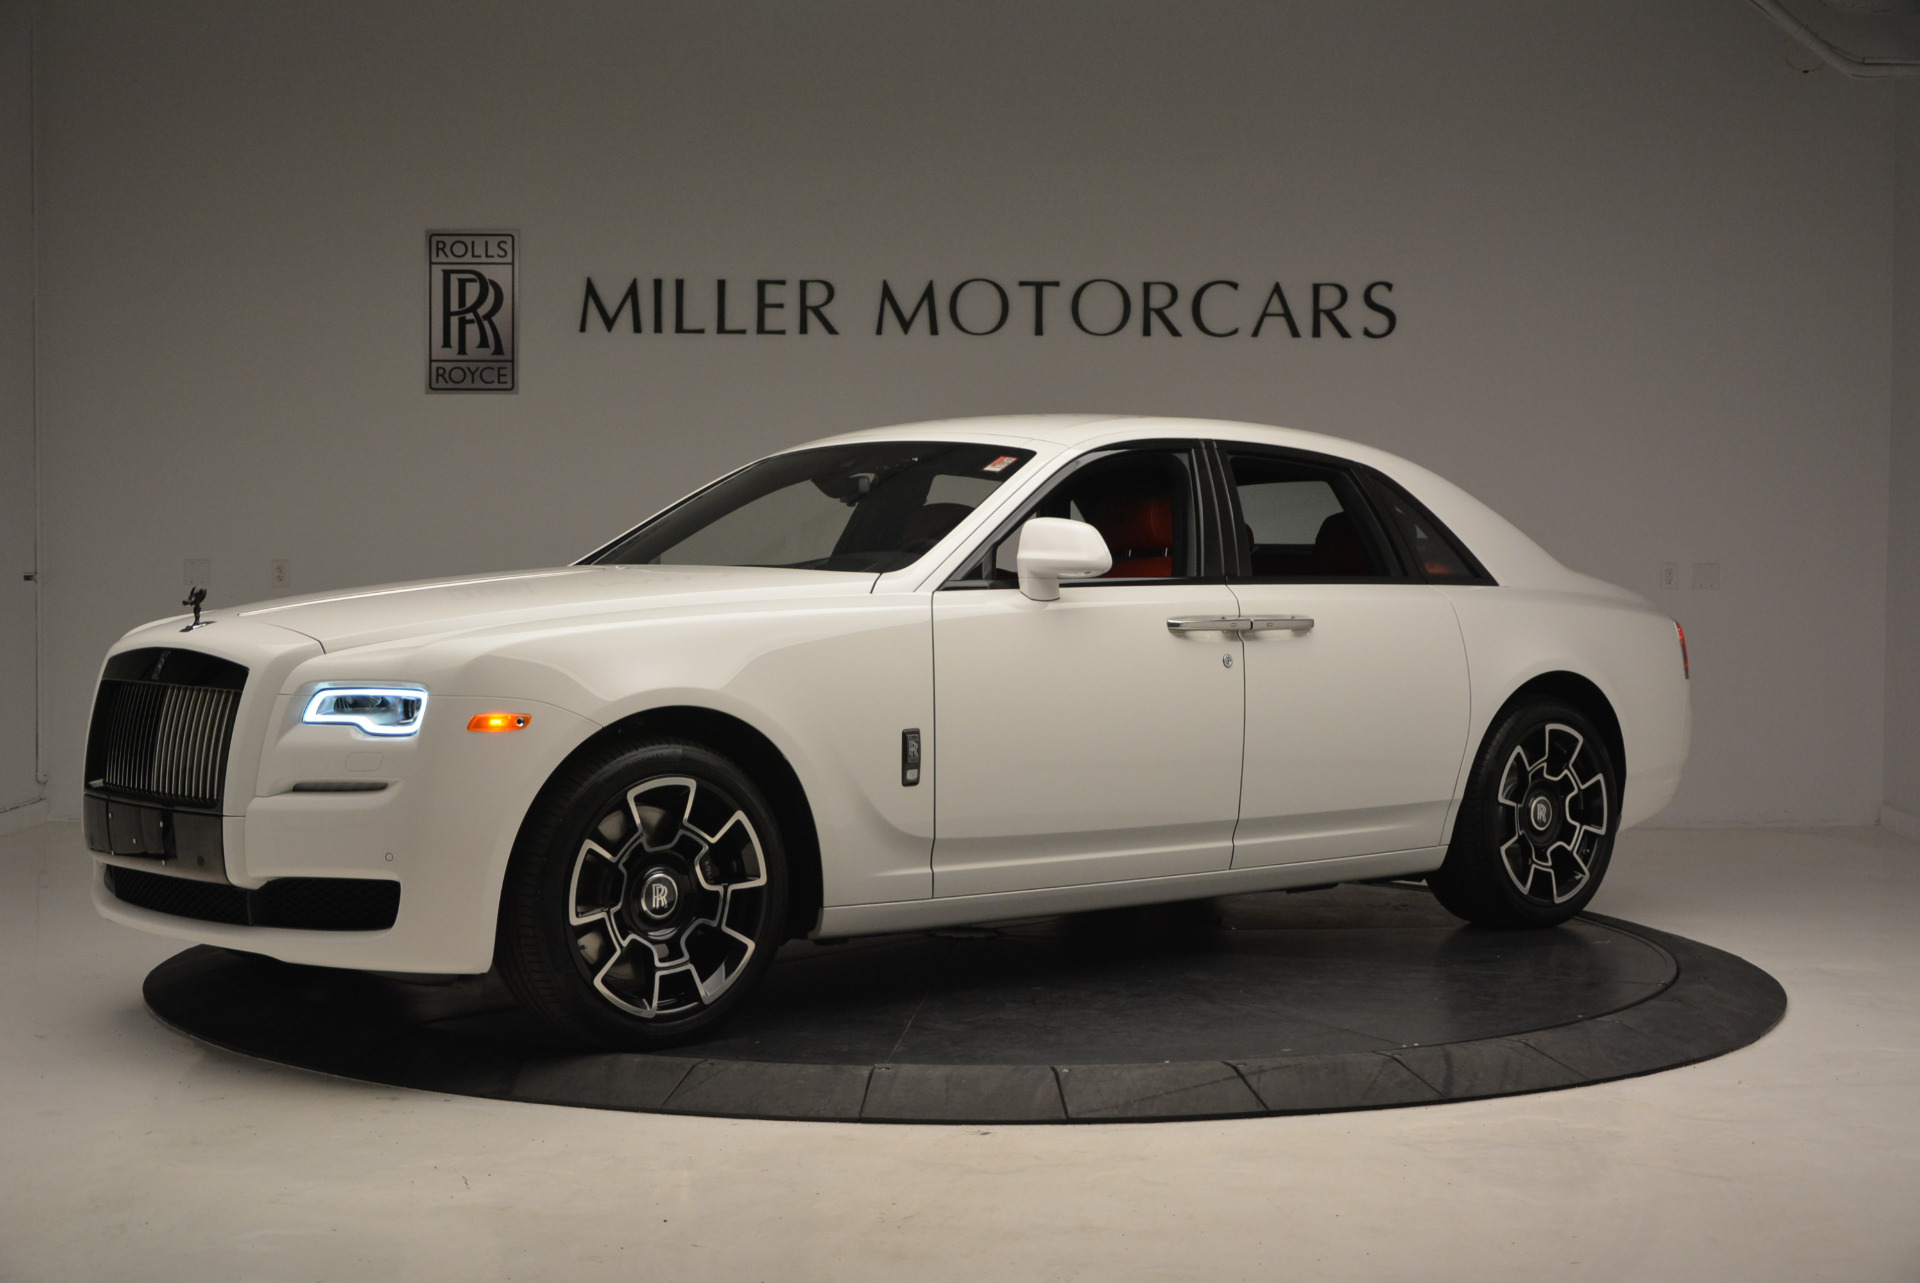 Used 2017 RollsRoyce Ghost Black Badge For Sale Sold  Perfect Auto  Collection Stock HUX54251